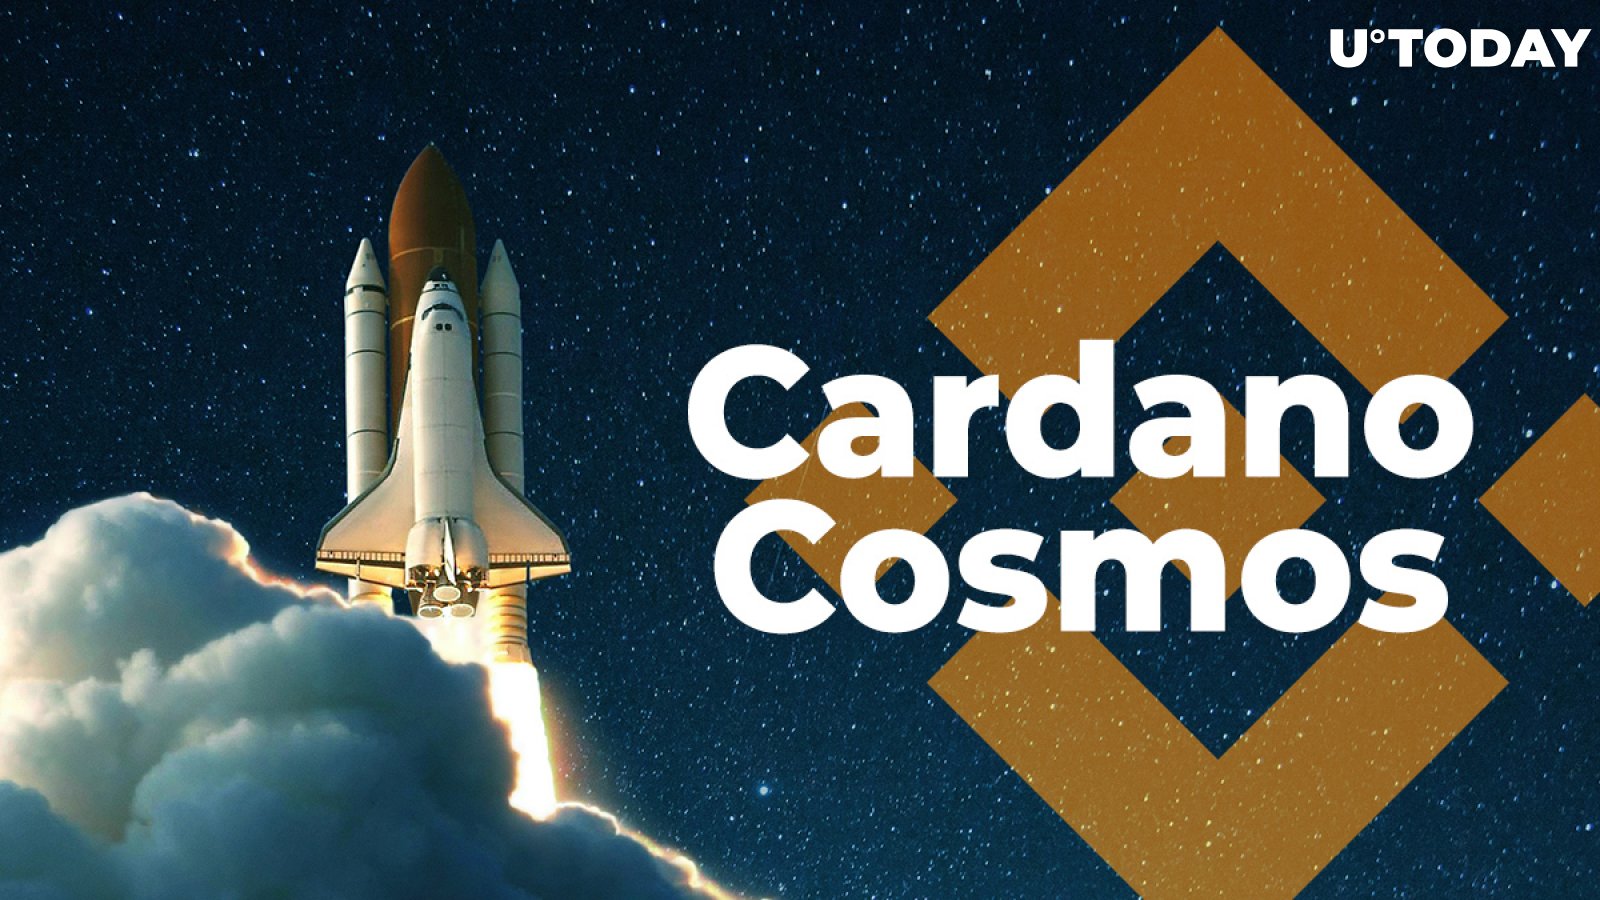 Cardano (ADA), Cosmos (ATOM) Staking Launched by Binance While BNB Adds 50% in 24 Hours